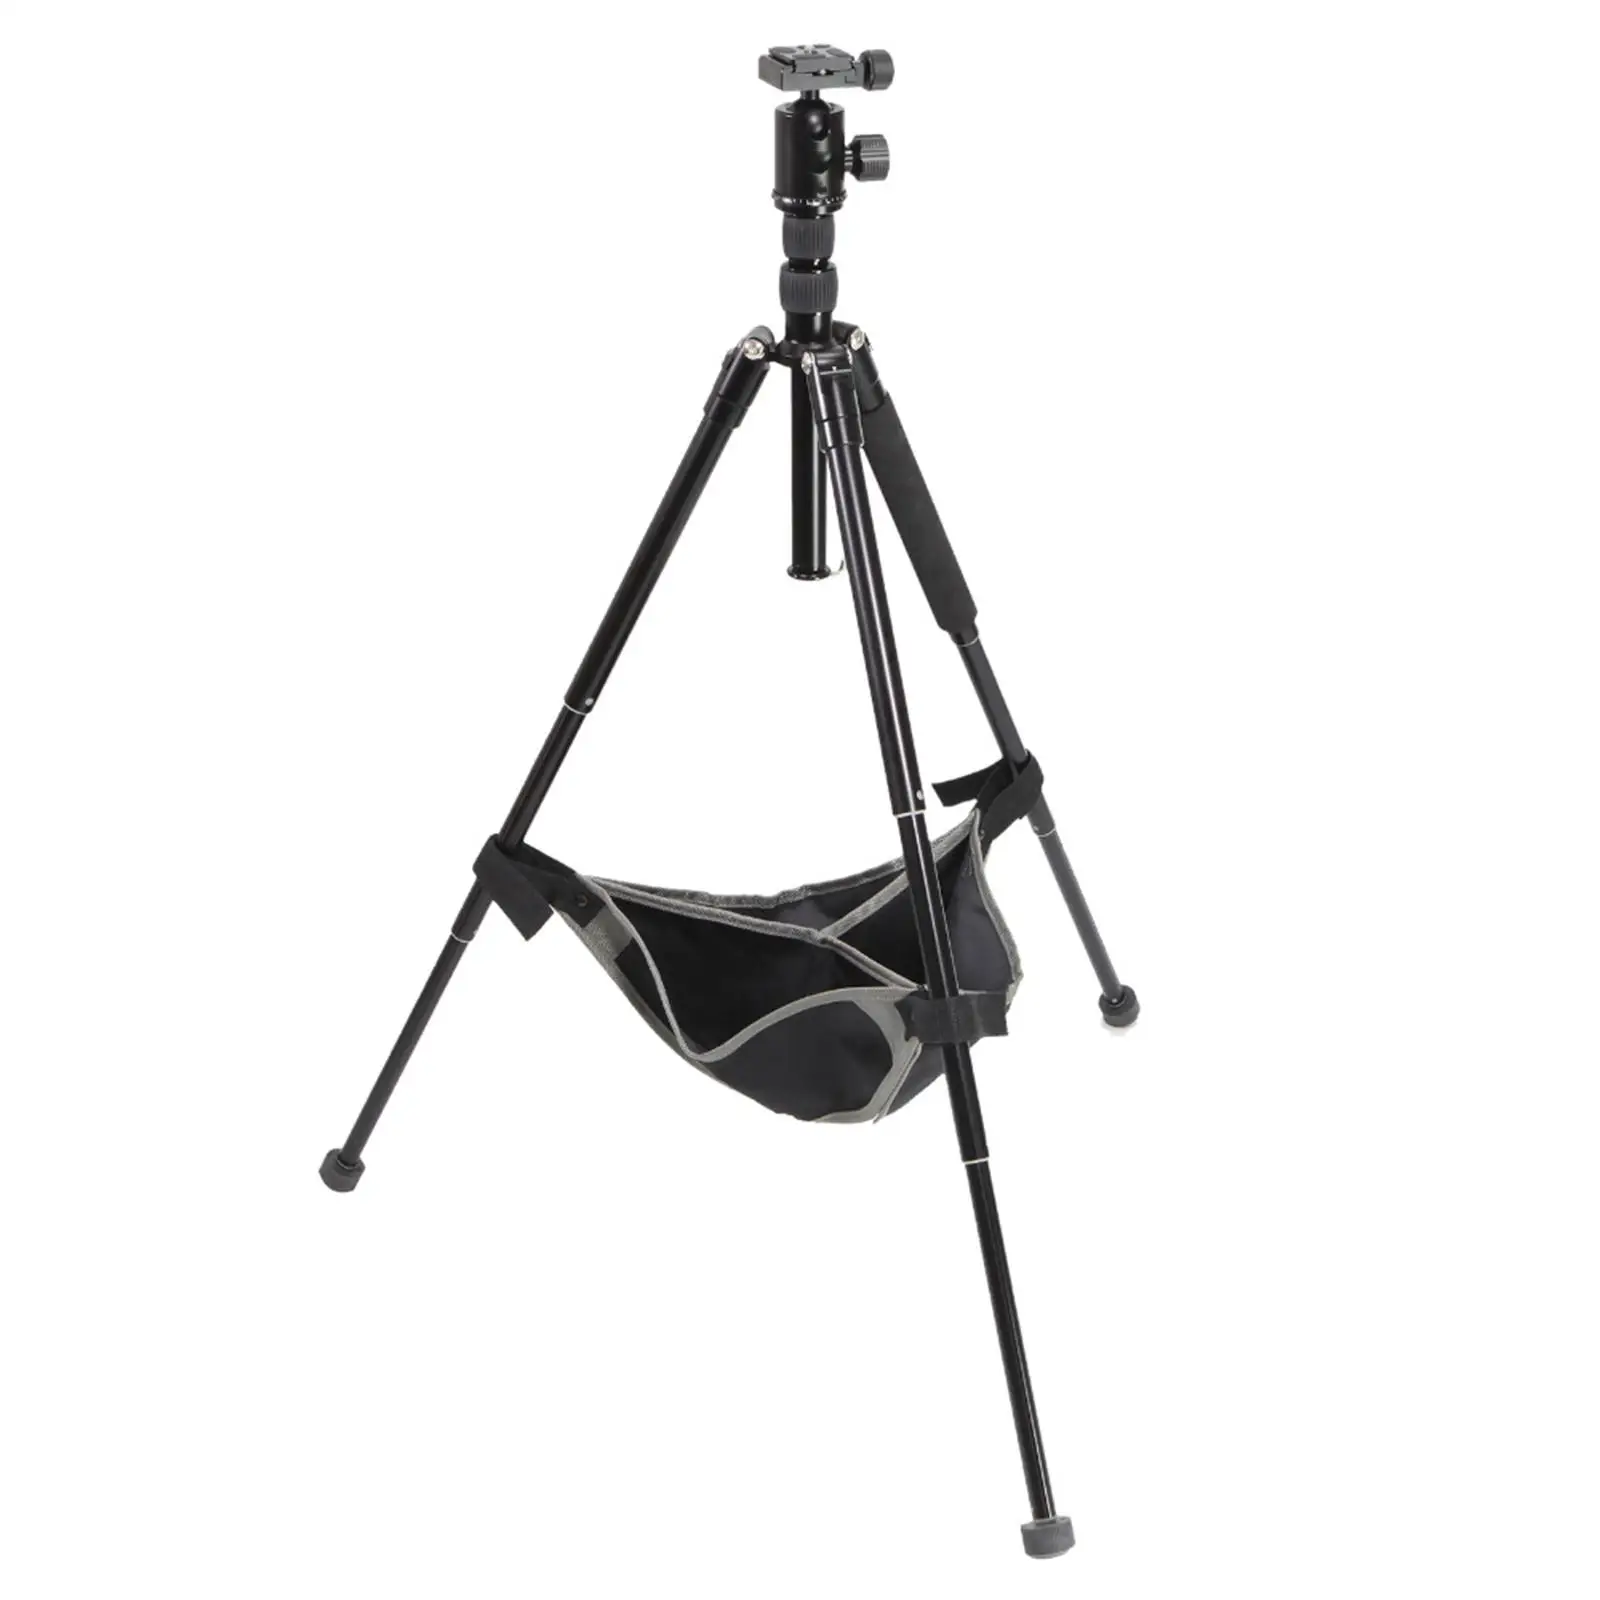 Portable  Tripod r Weight Bag Durable Lightweight Nylon Adjustable Tripod Weight Bag for  Photoshoot Light Stand Tripod